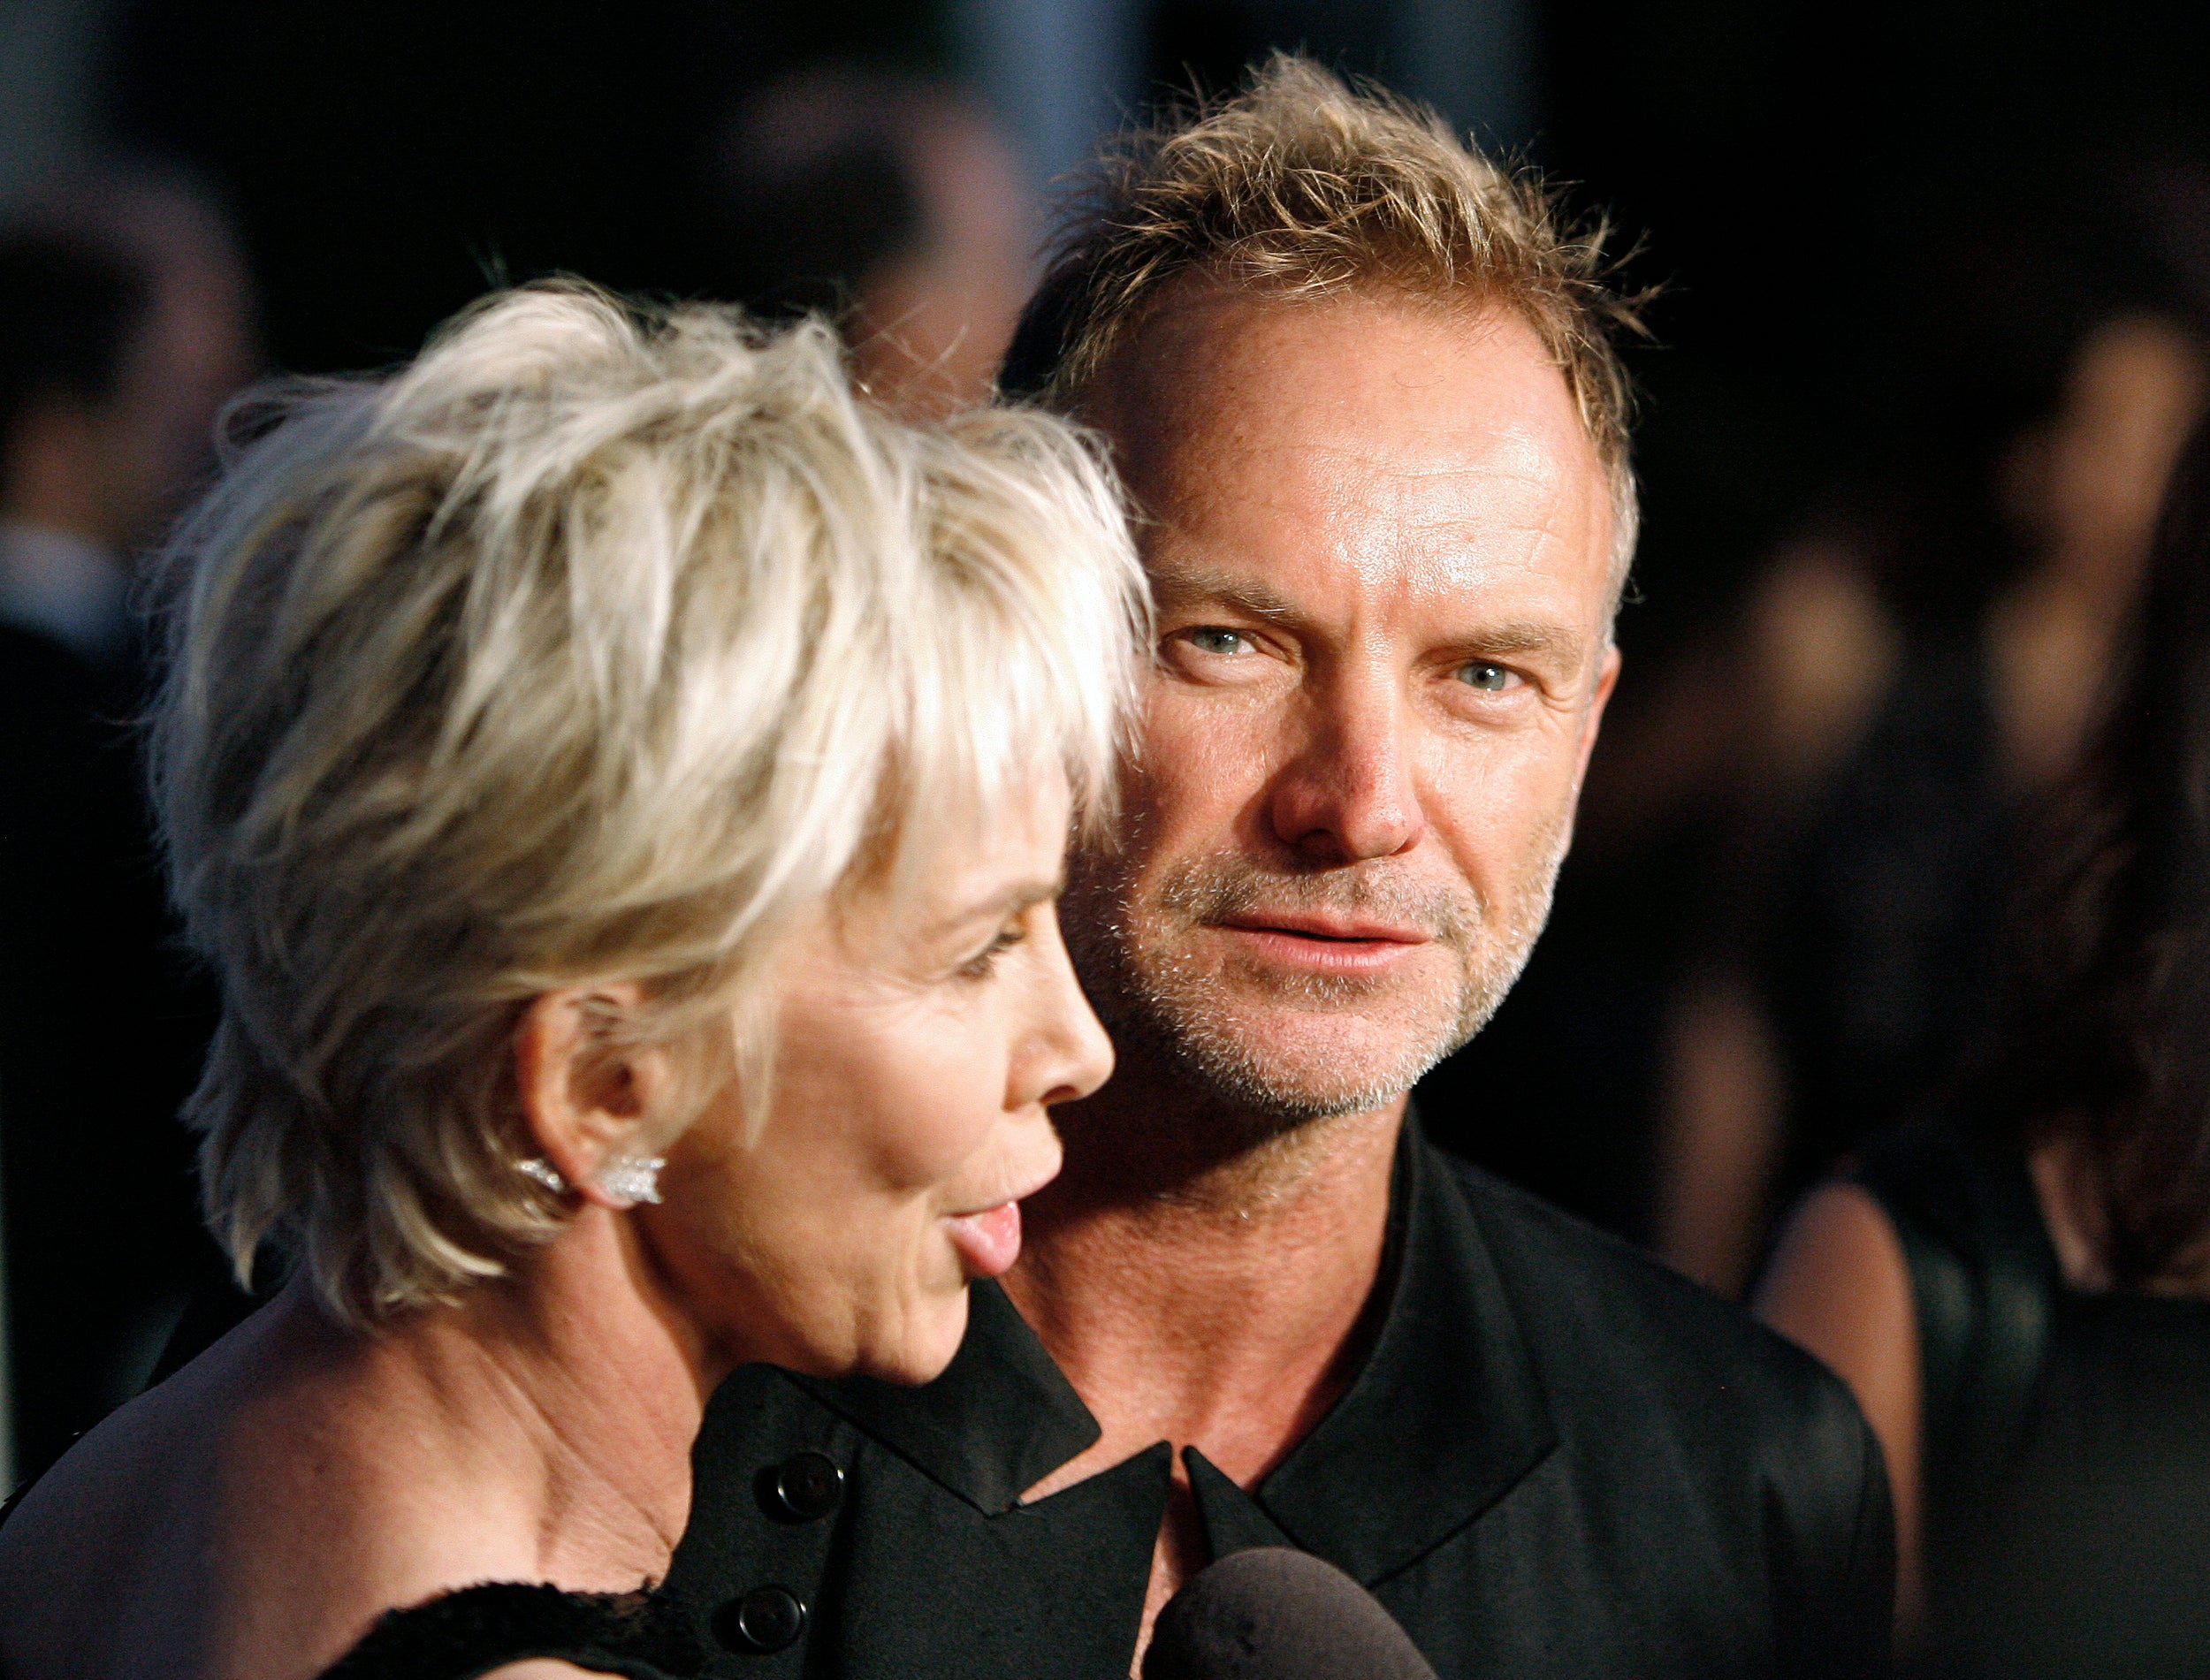 Sting and wife Trudie own 900-acre Tuscan estate called Il Palagio